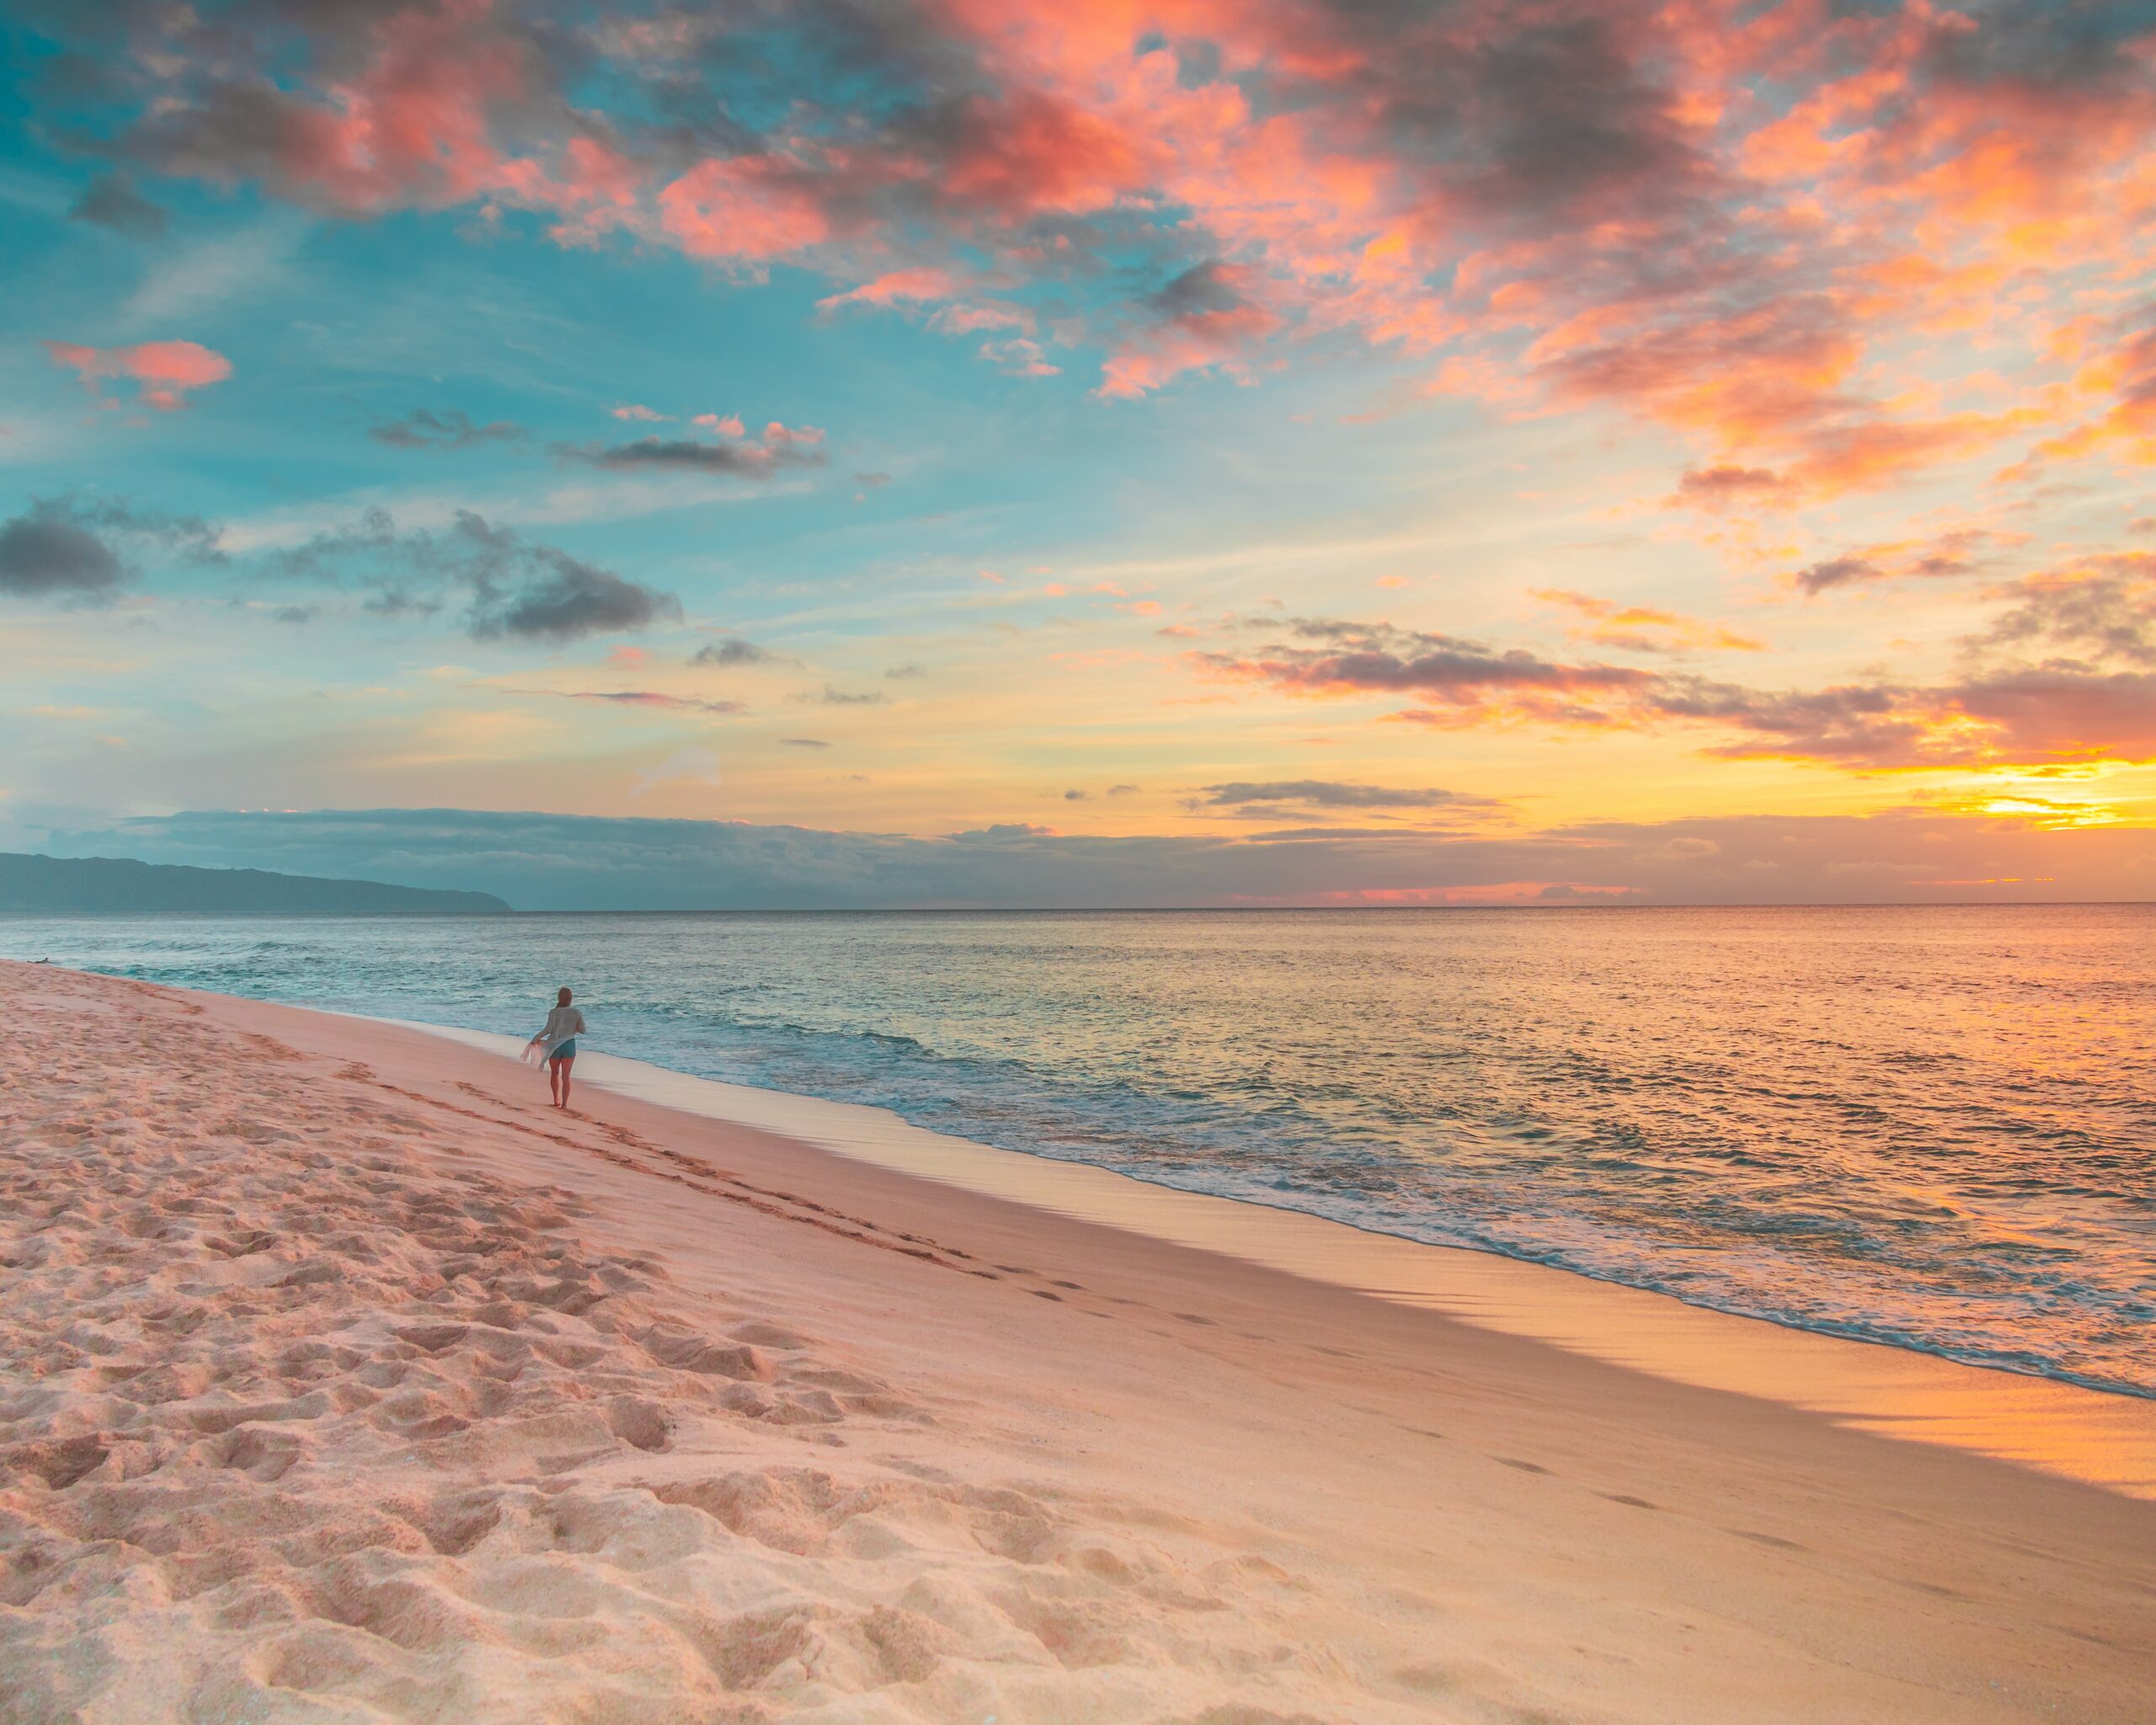 walking along the sand in hawaii at sunset